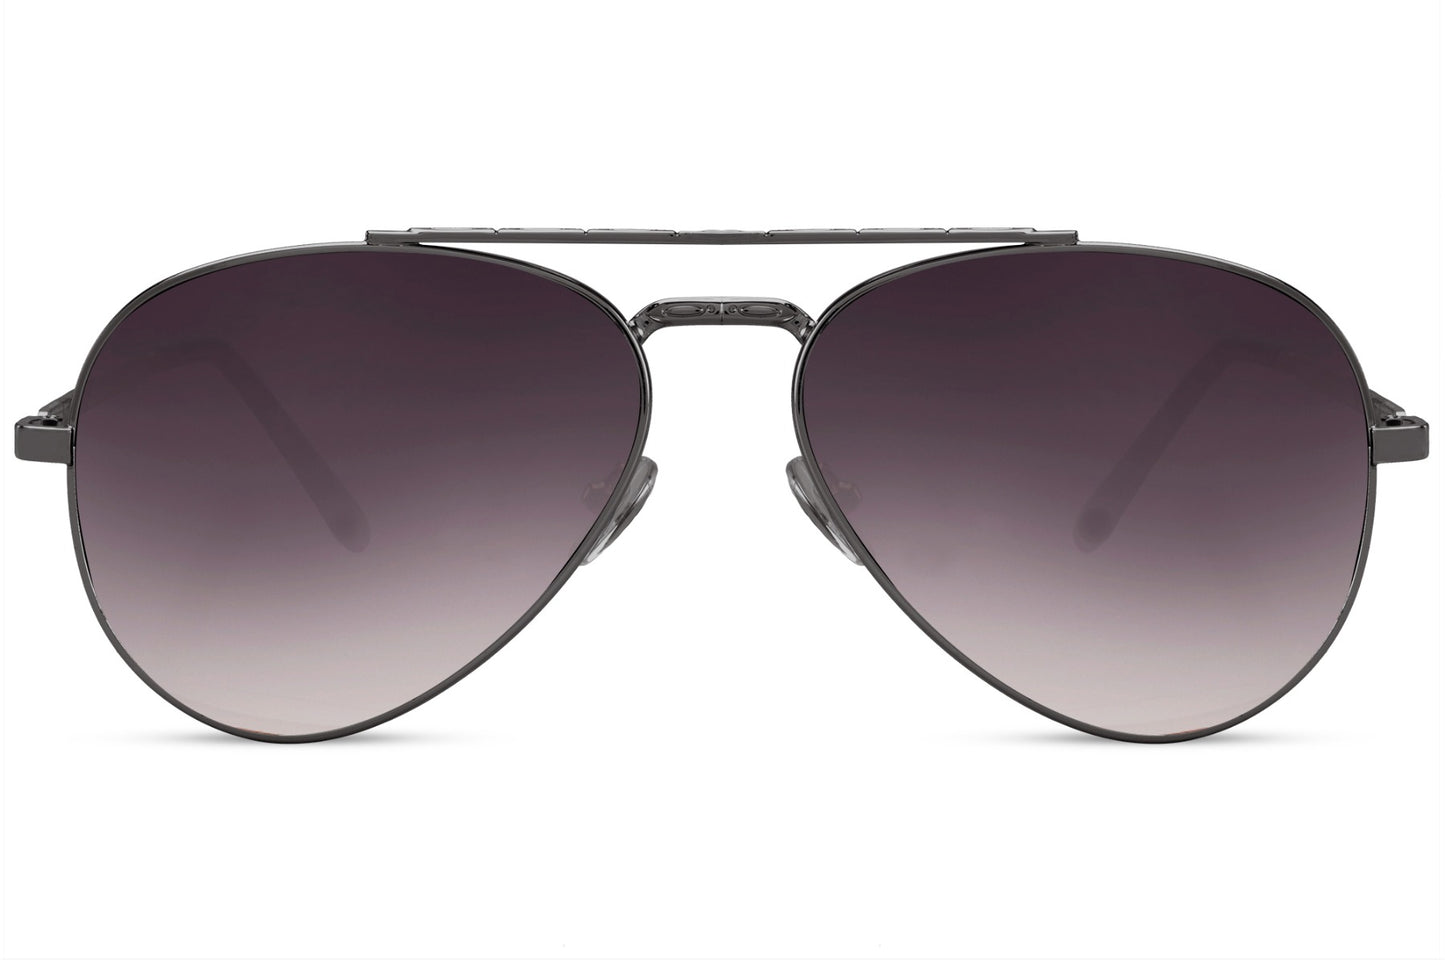 Vintage-Inspired Aviator Sunglasses Collection